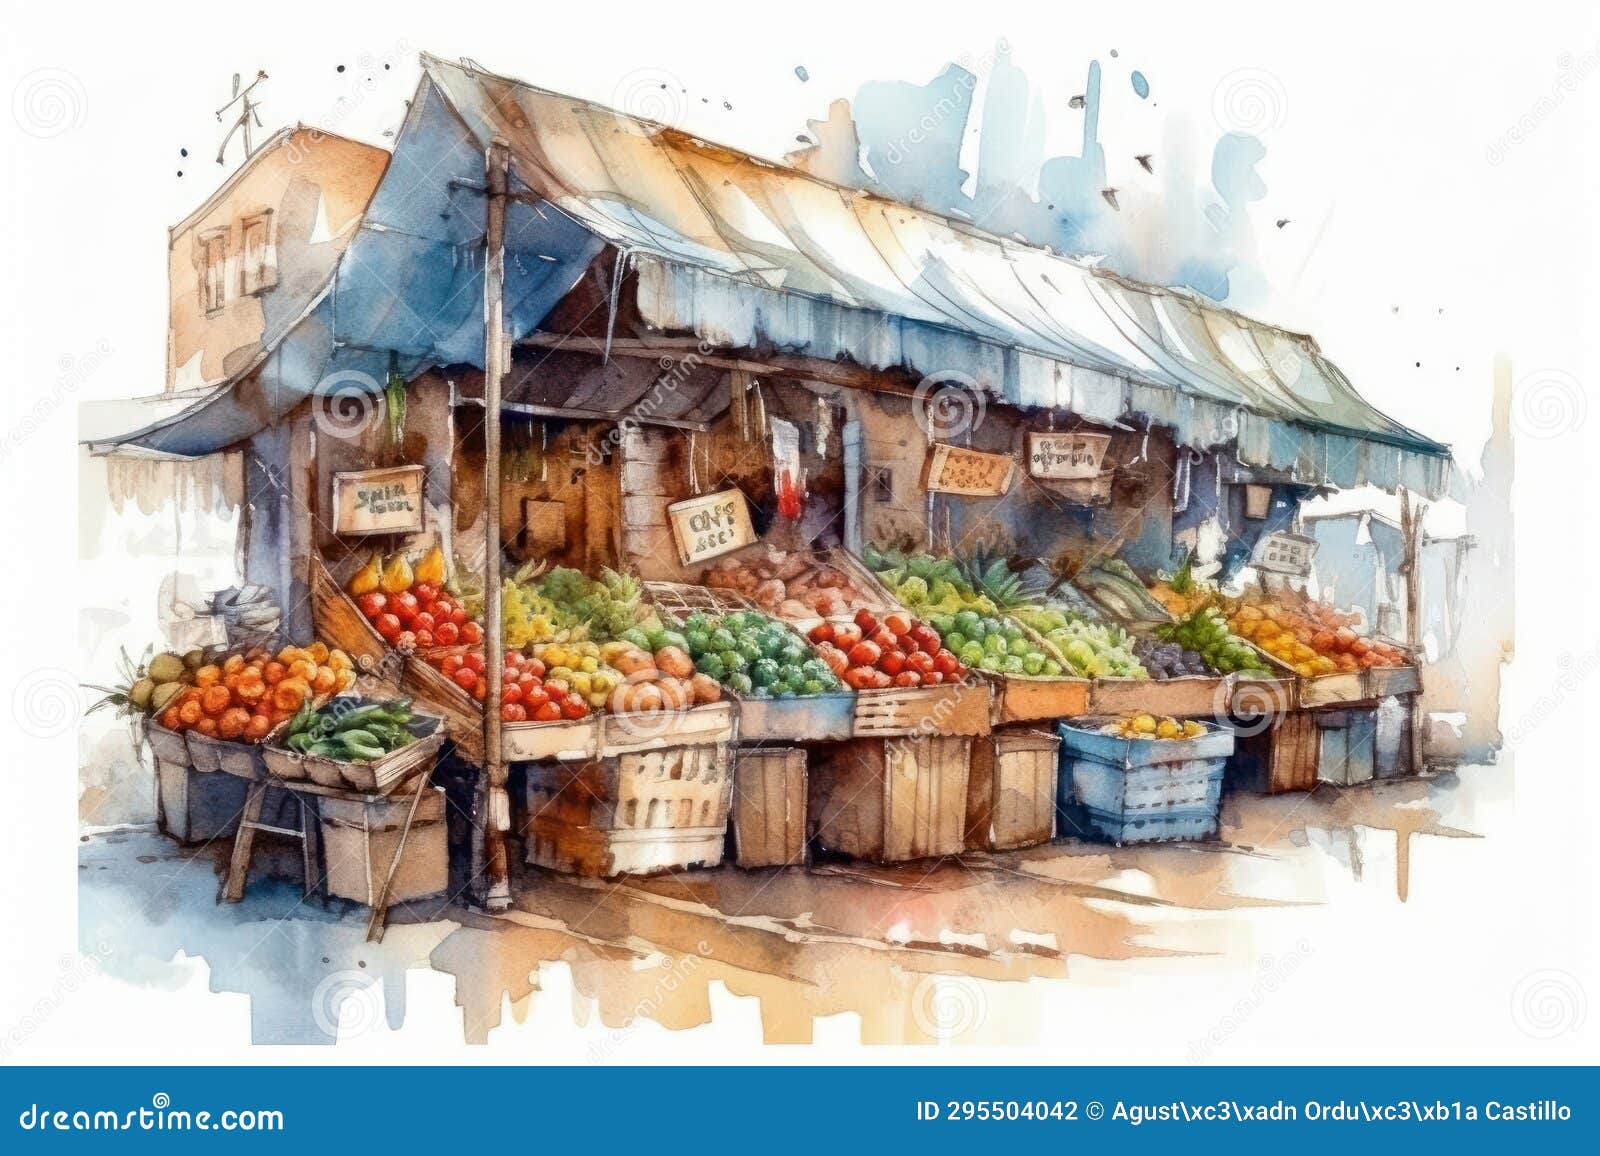 Ink and Wash 4: Street Scene or Busy Market | Jo Hall